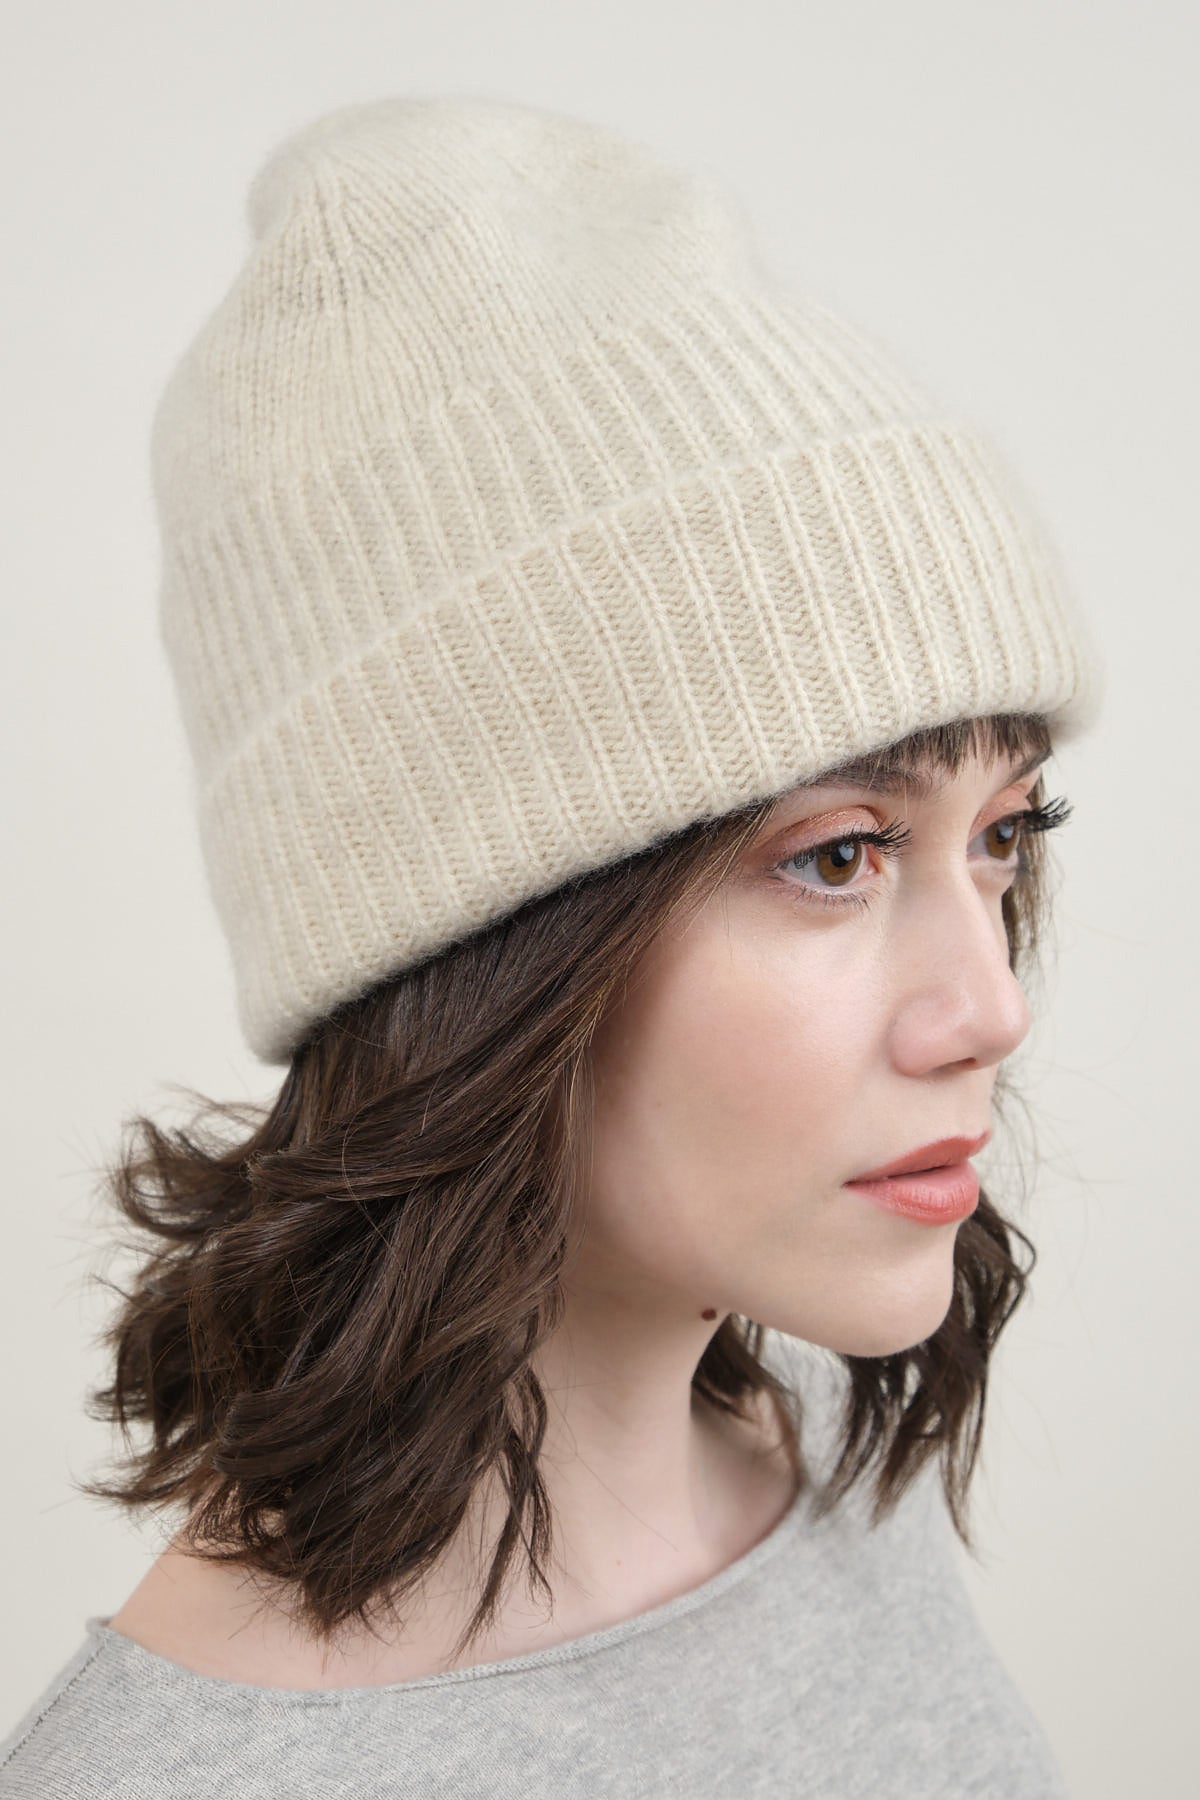 Knit Cap in Natural